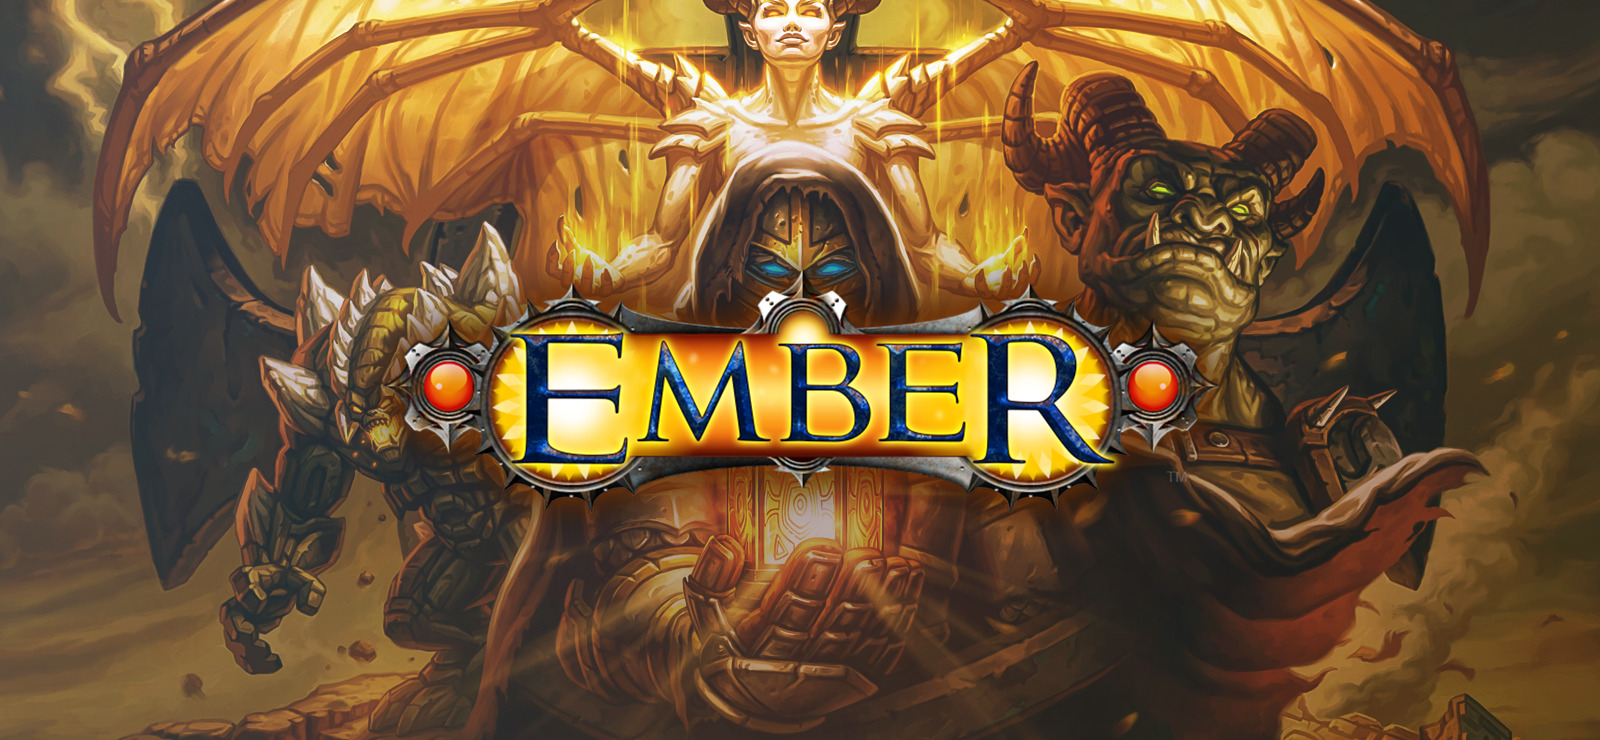 download Empire of Ember free